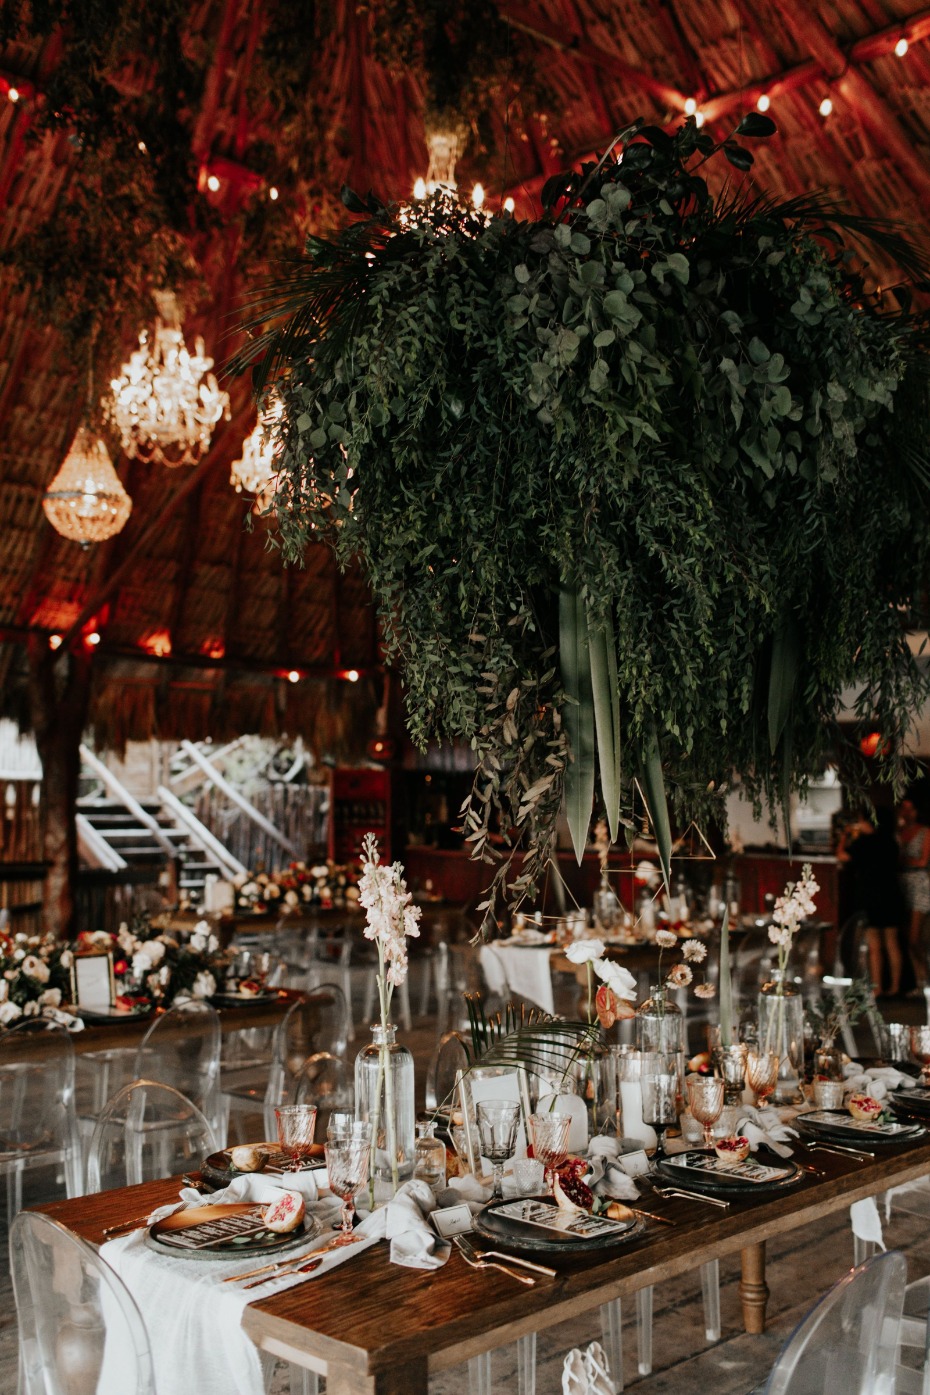 15 Things Your Destination Wedding Planner Really Wants You To Know